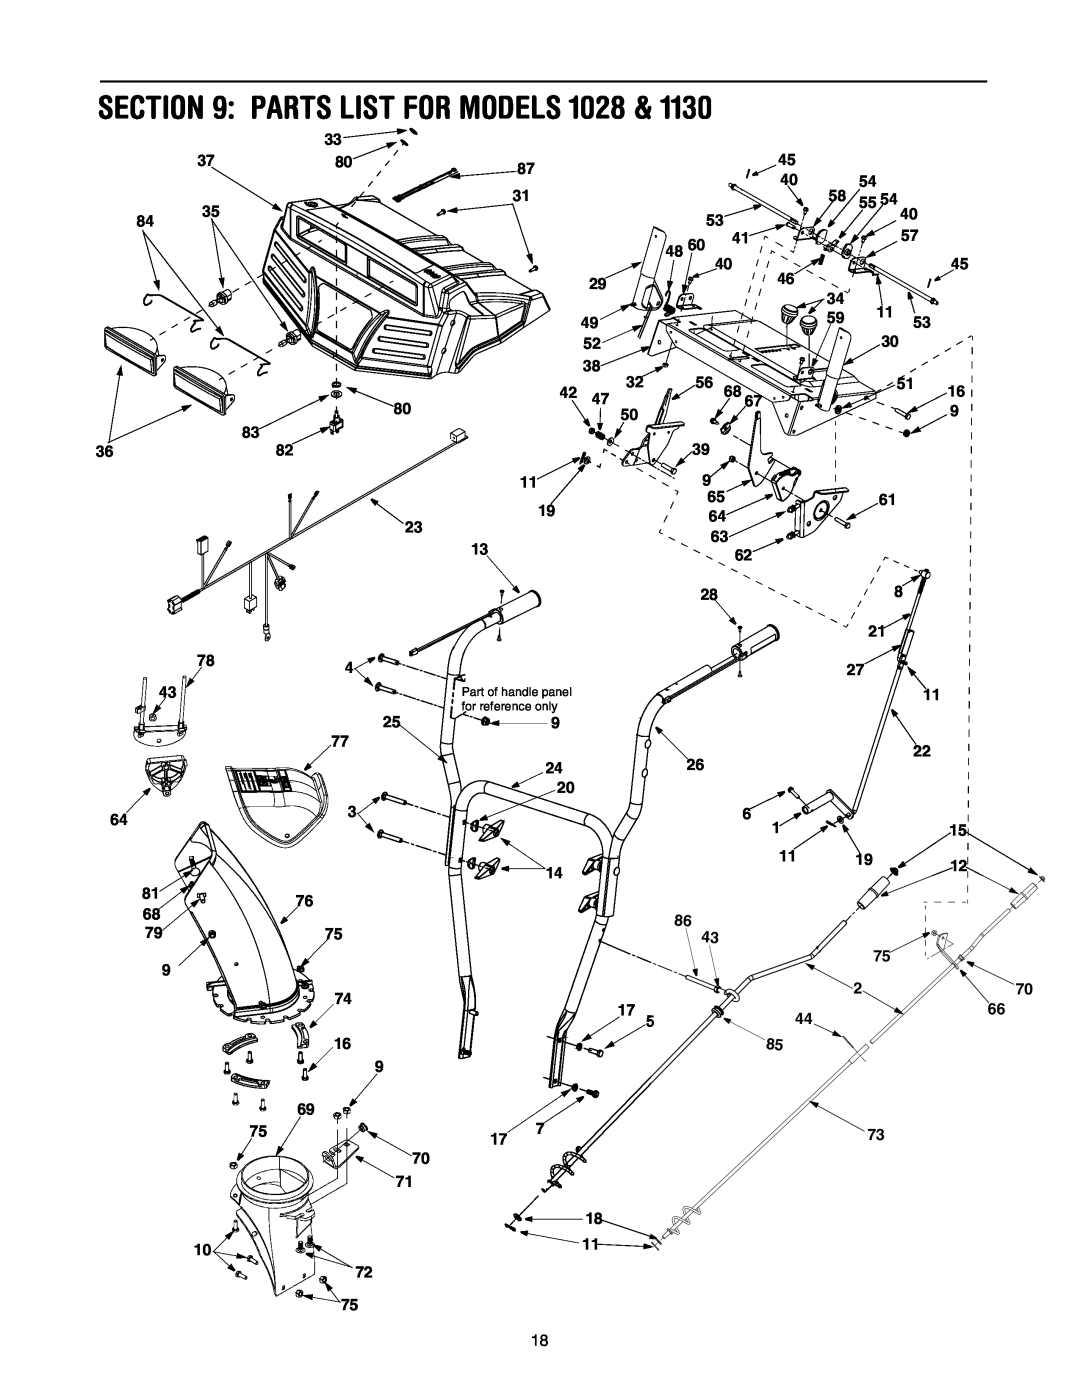 Troy-Bilt 1130, 1028 manual Parts List For Models, Part of handle panel, for reference only 